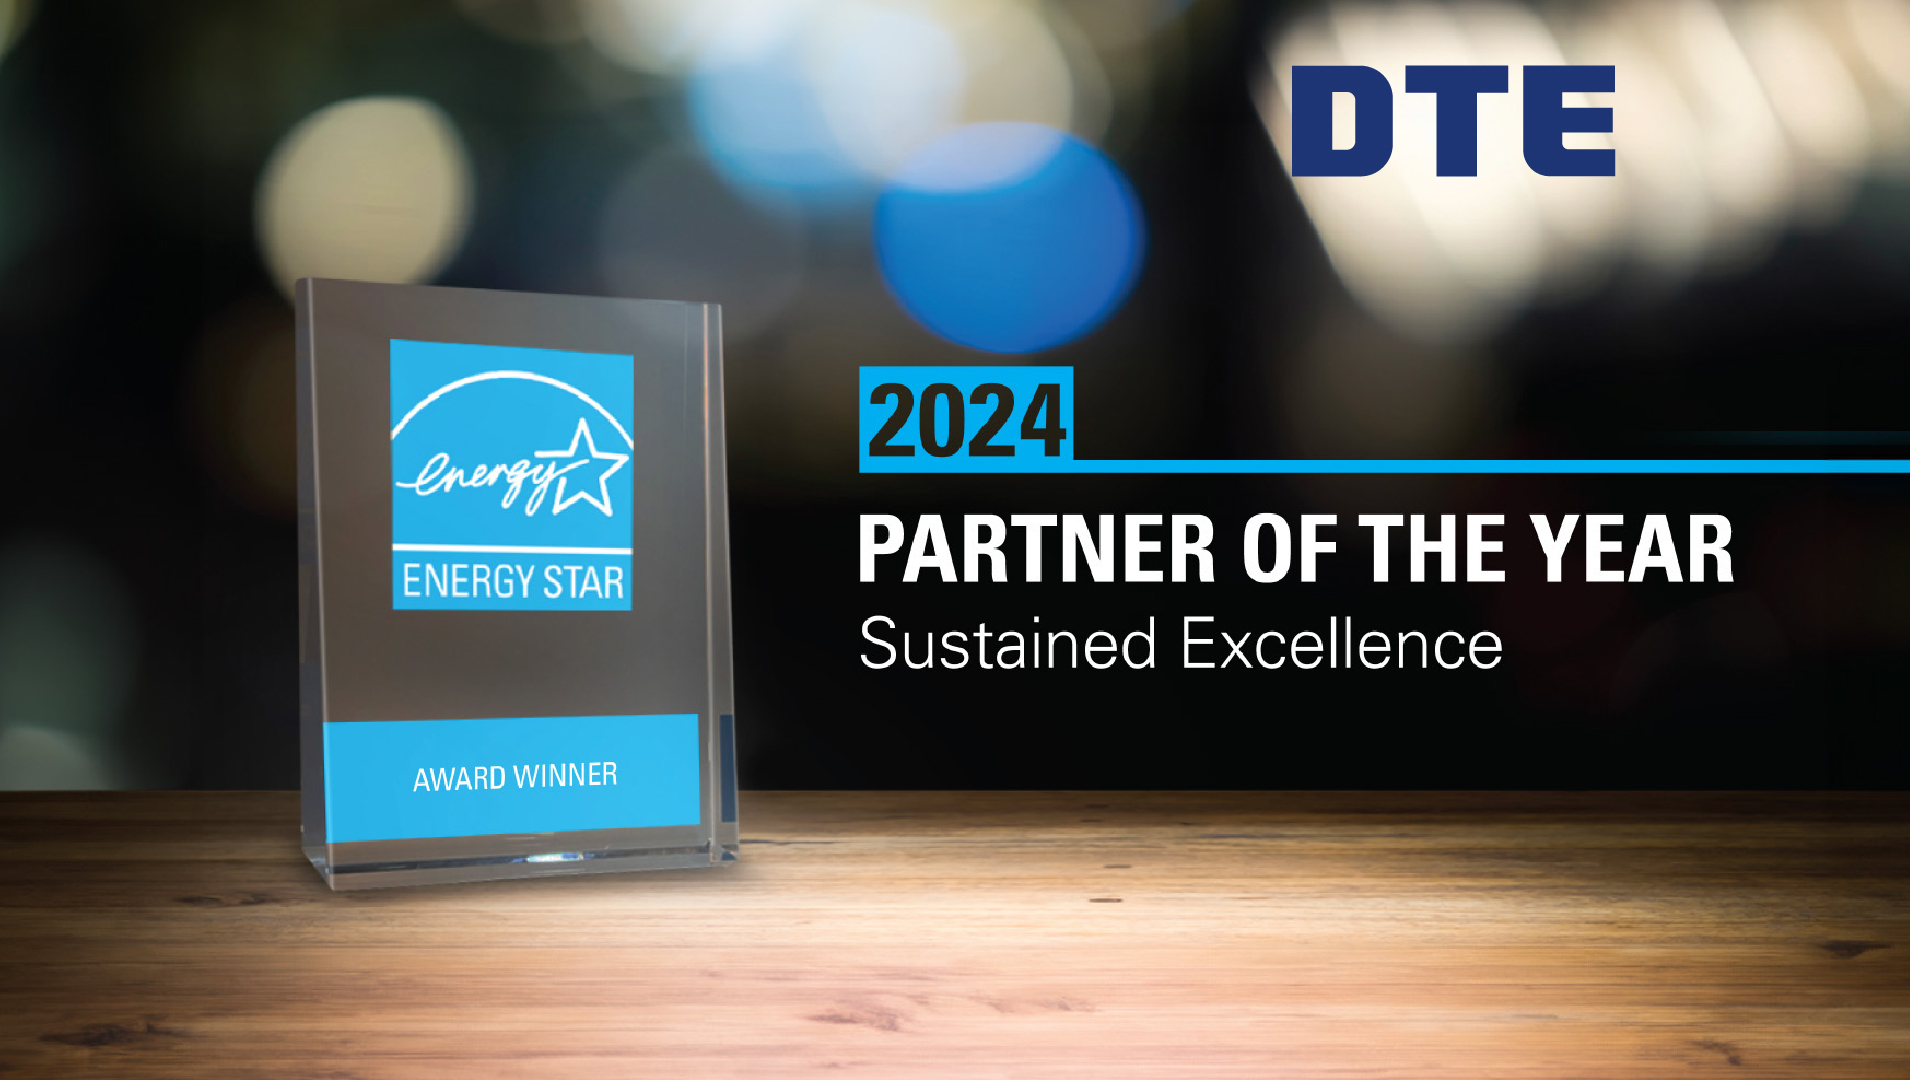 US Environmental Protection Agency (EPA) honors DTE Energy with the 2024 ENERGY STAR® Partner of the Year Award for sustained excellence in Energy Efficiency